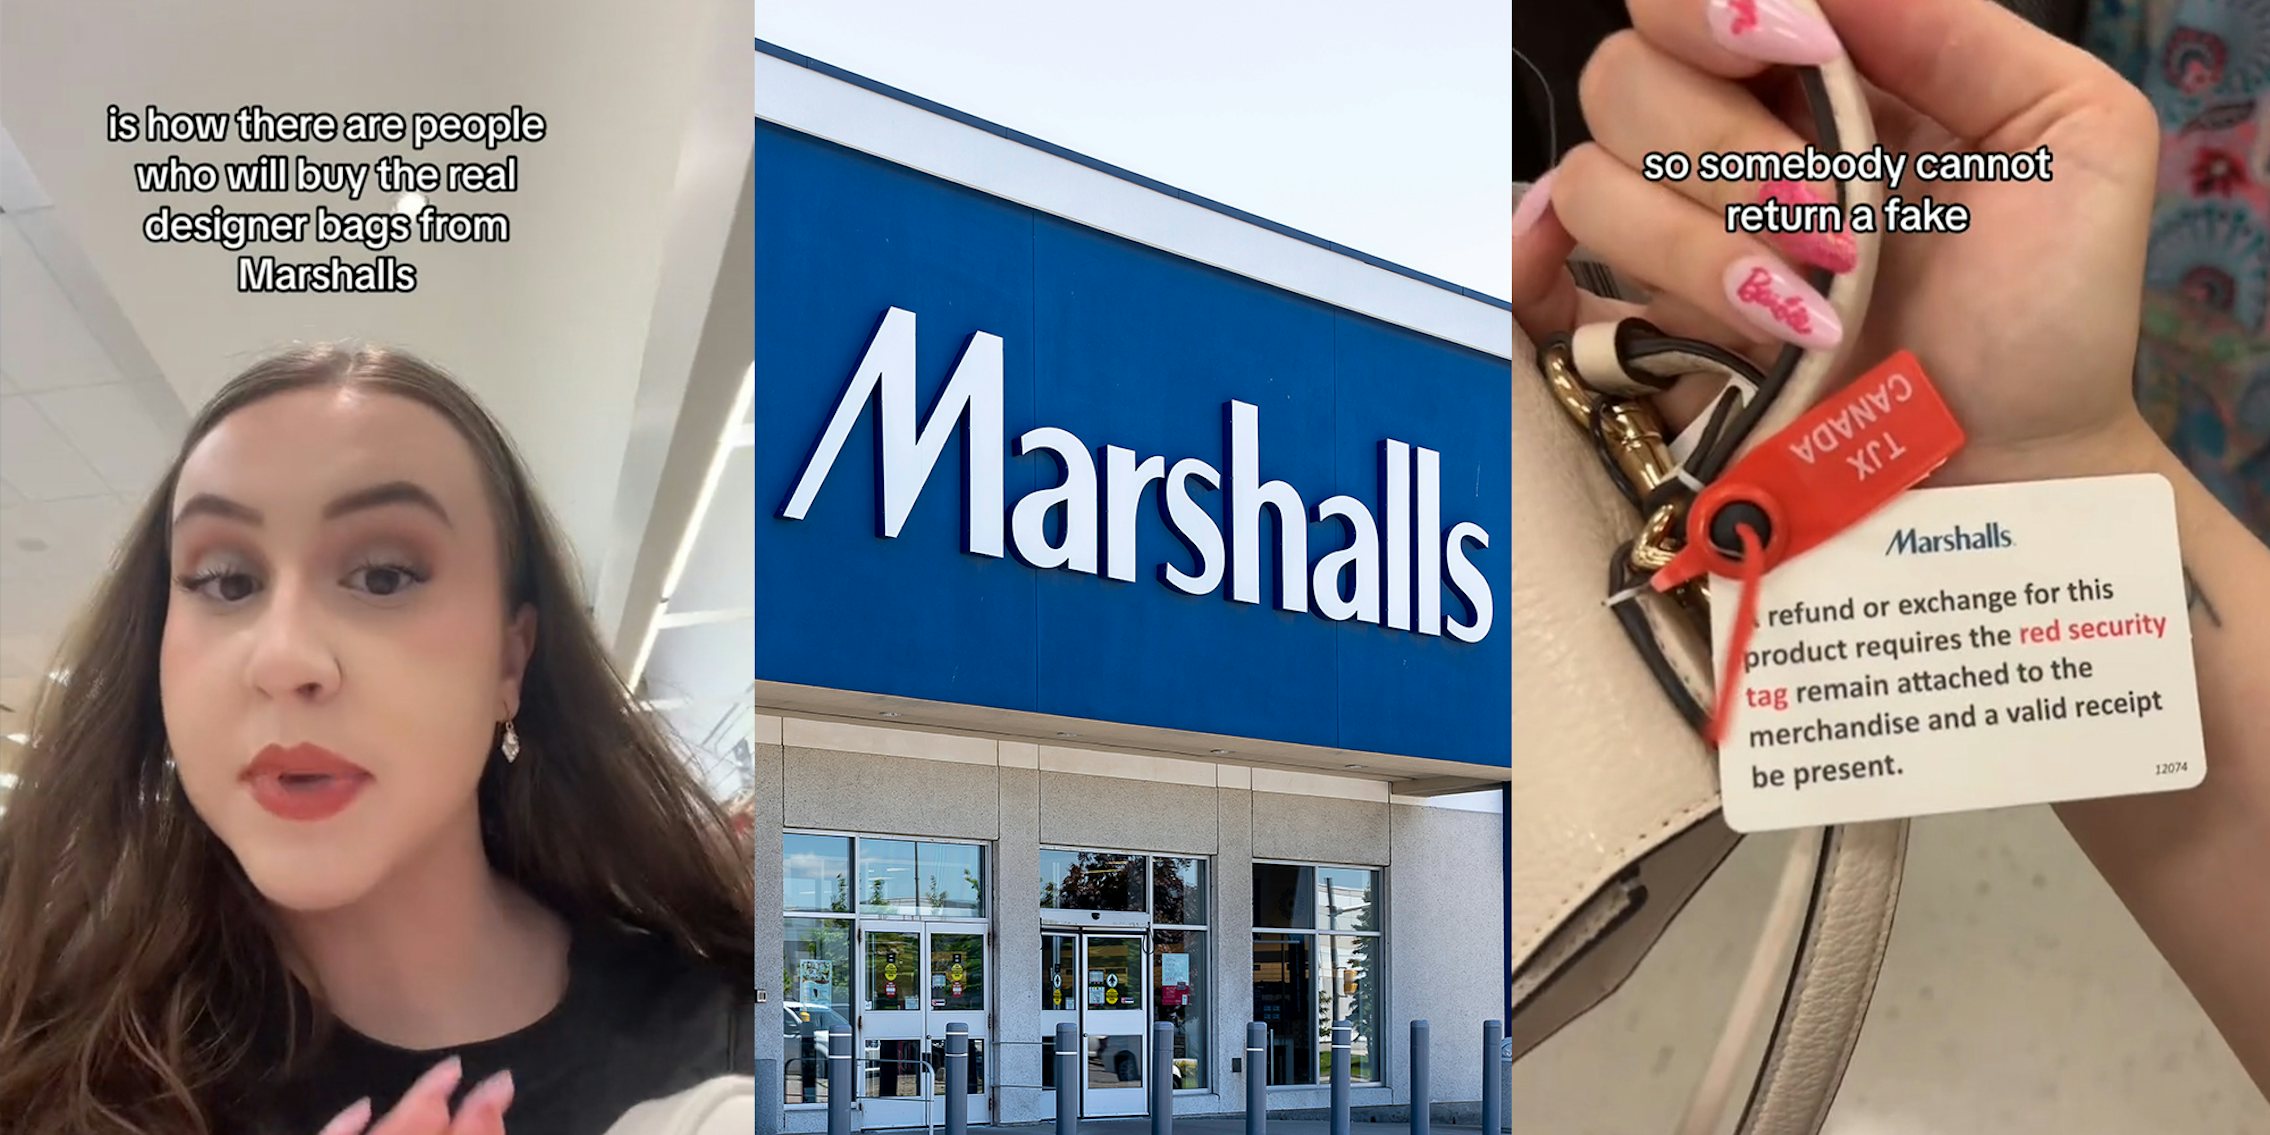 shopper says store started putting hard-to-remove tags on bags to prevent customers from swapping real luxury items for fakes